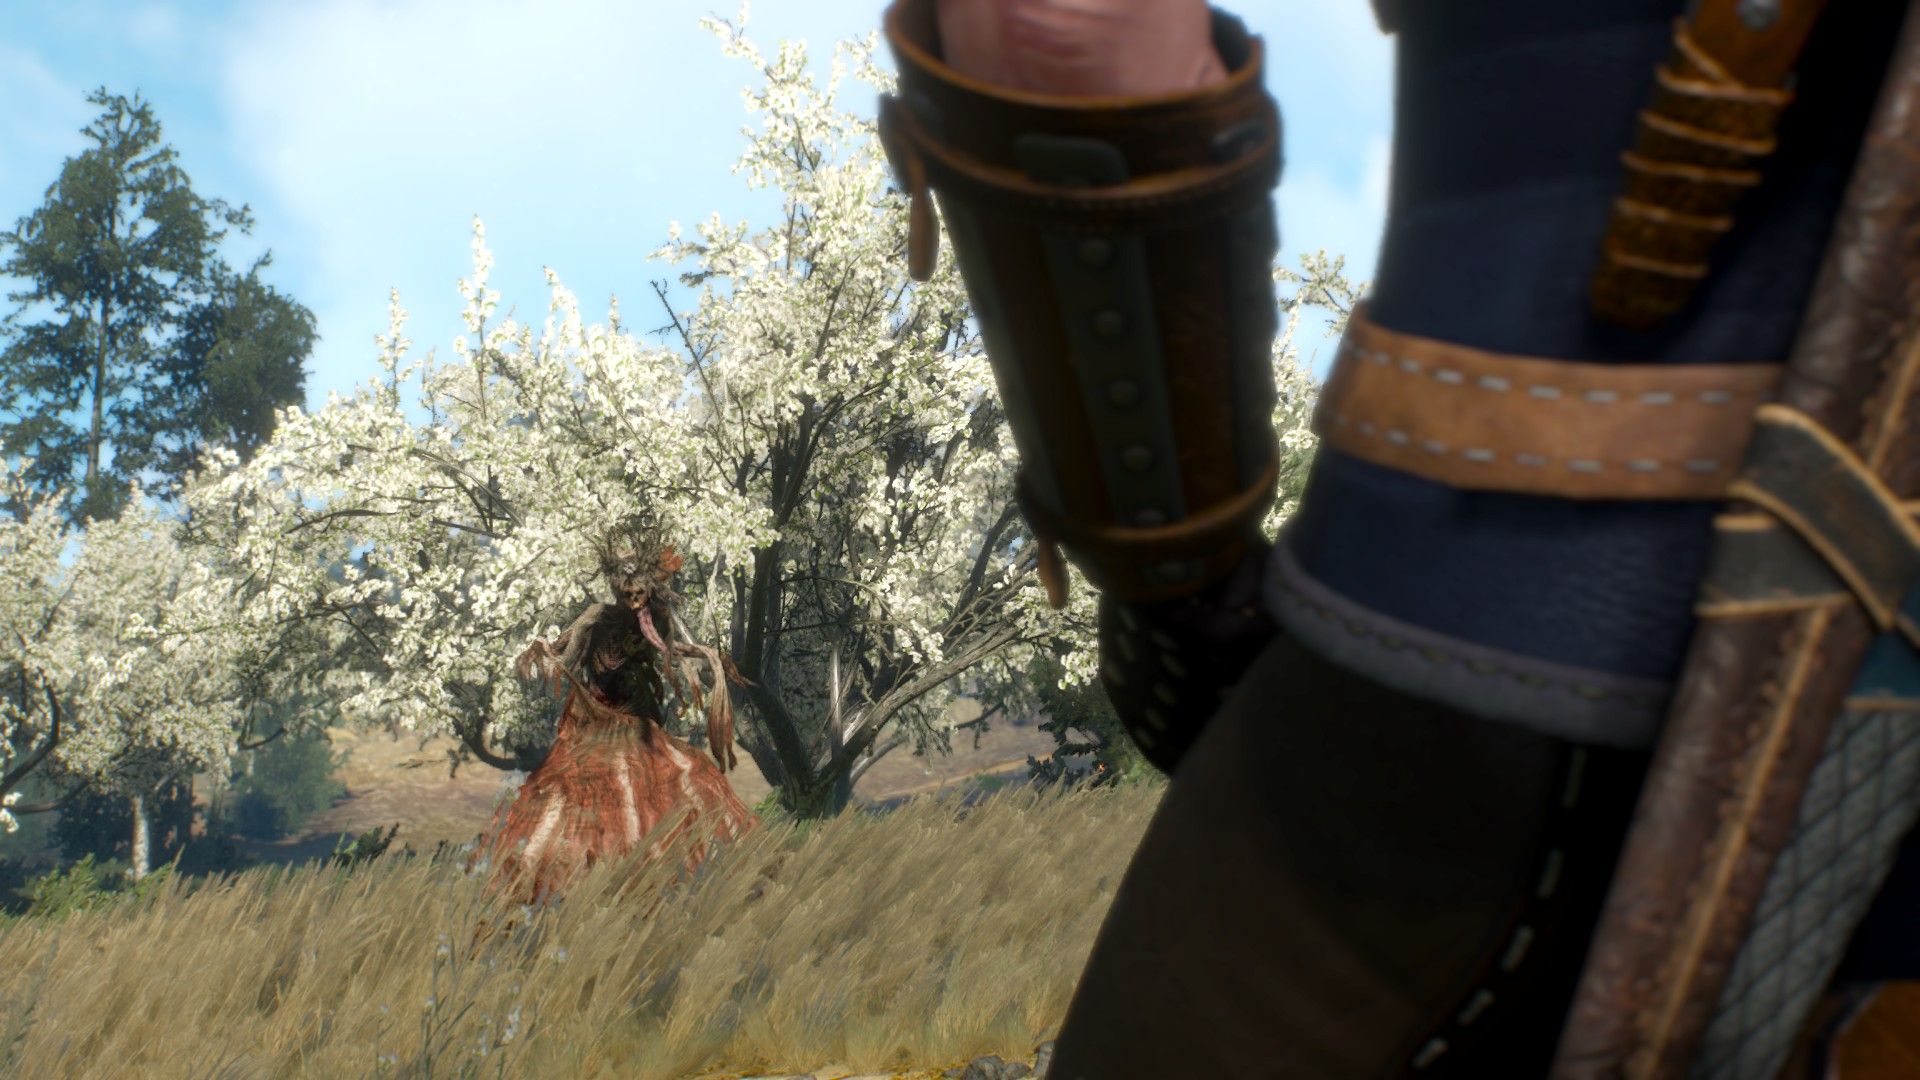 A Noonwraith appears opposite Geralt in a field as the two prepare to fight.